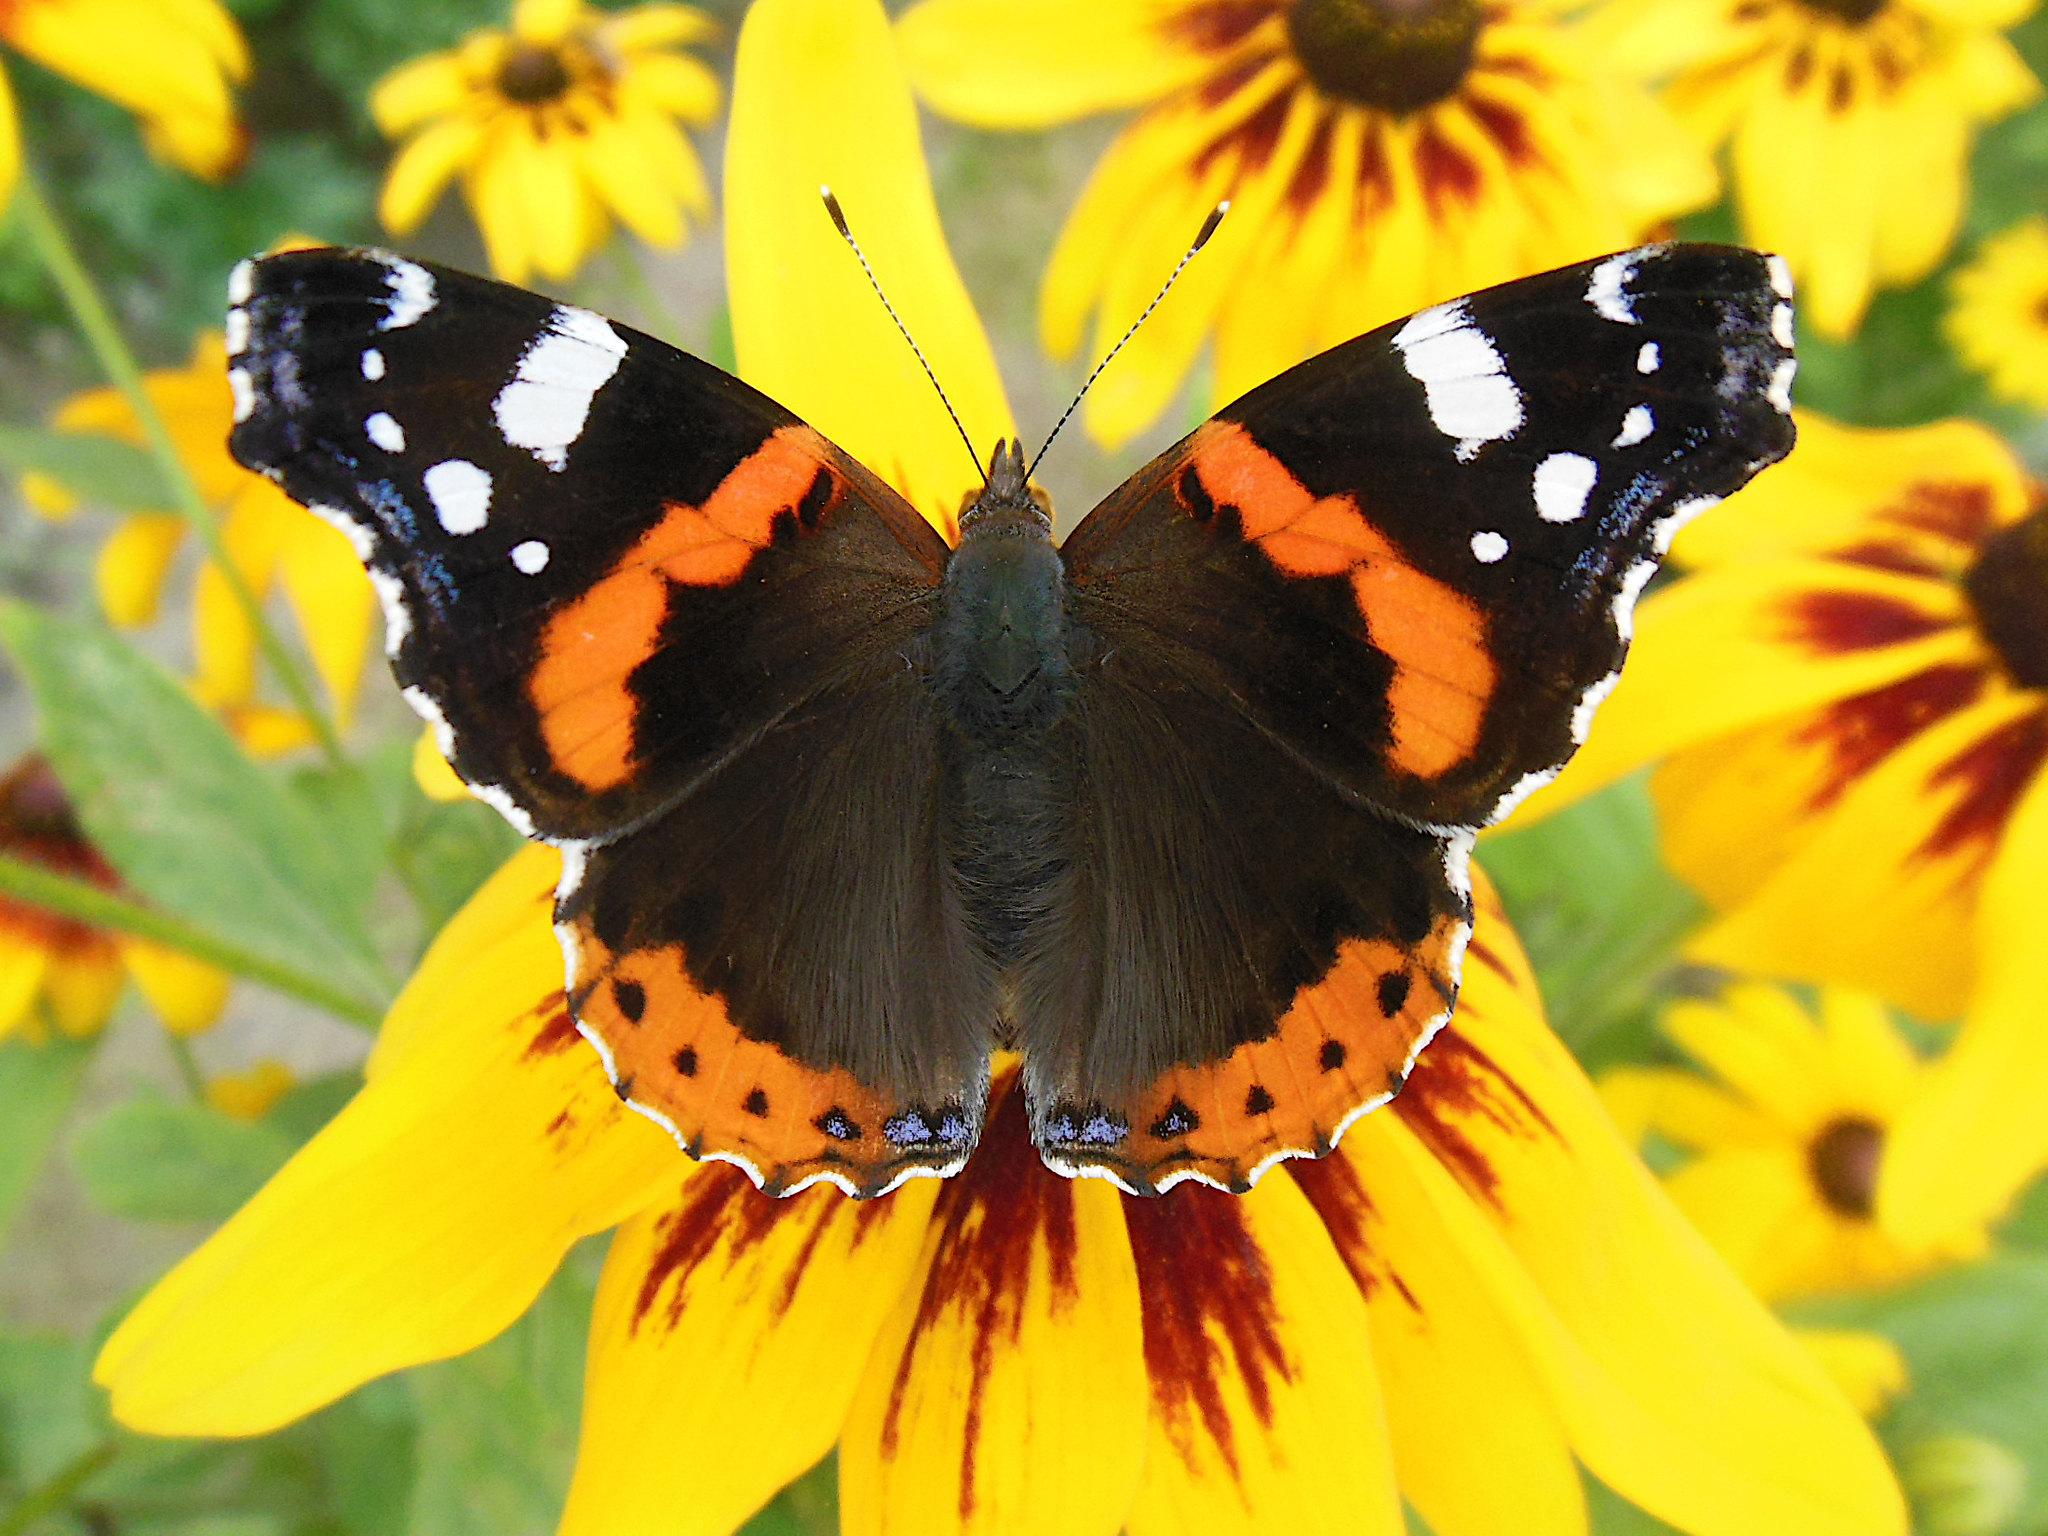 Red Admiral by Logi Aer